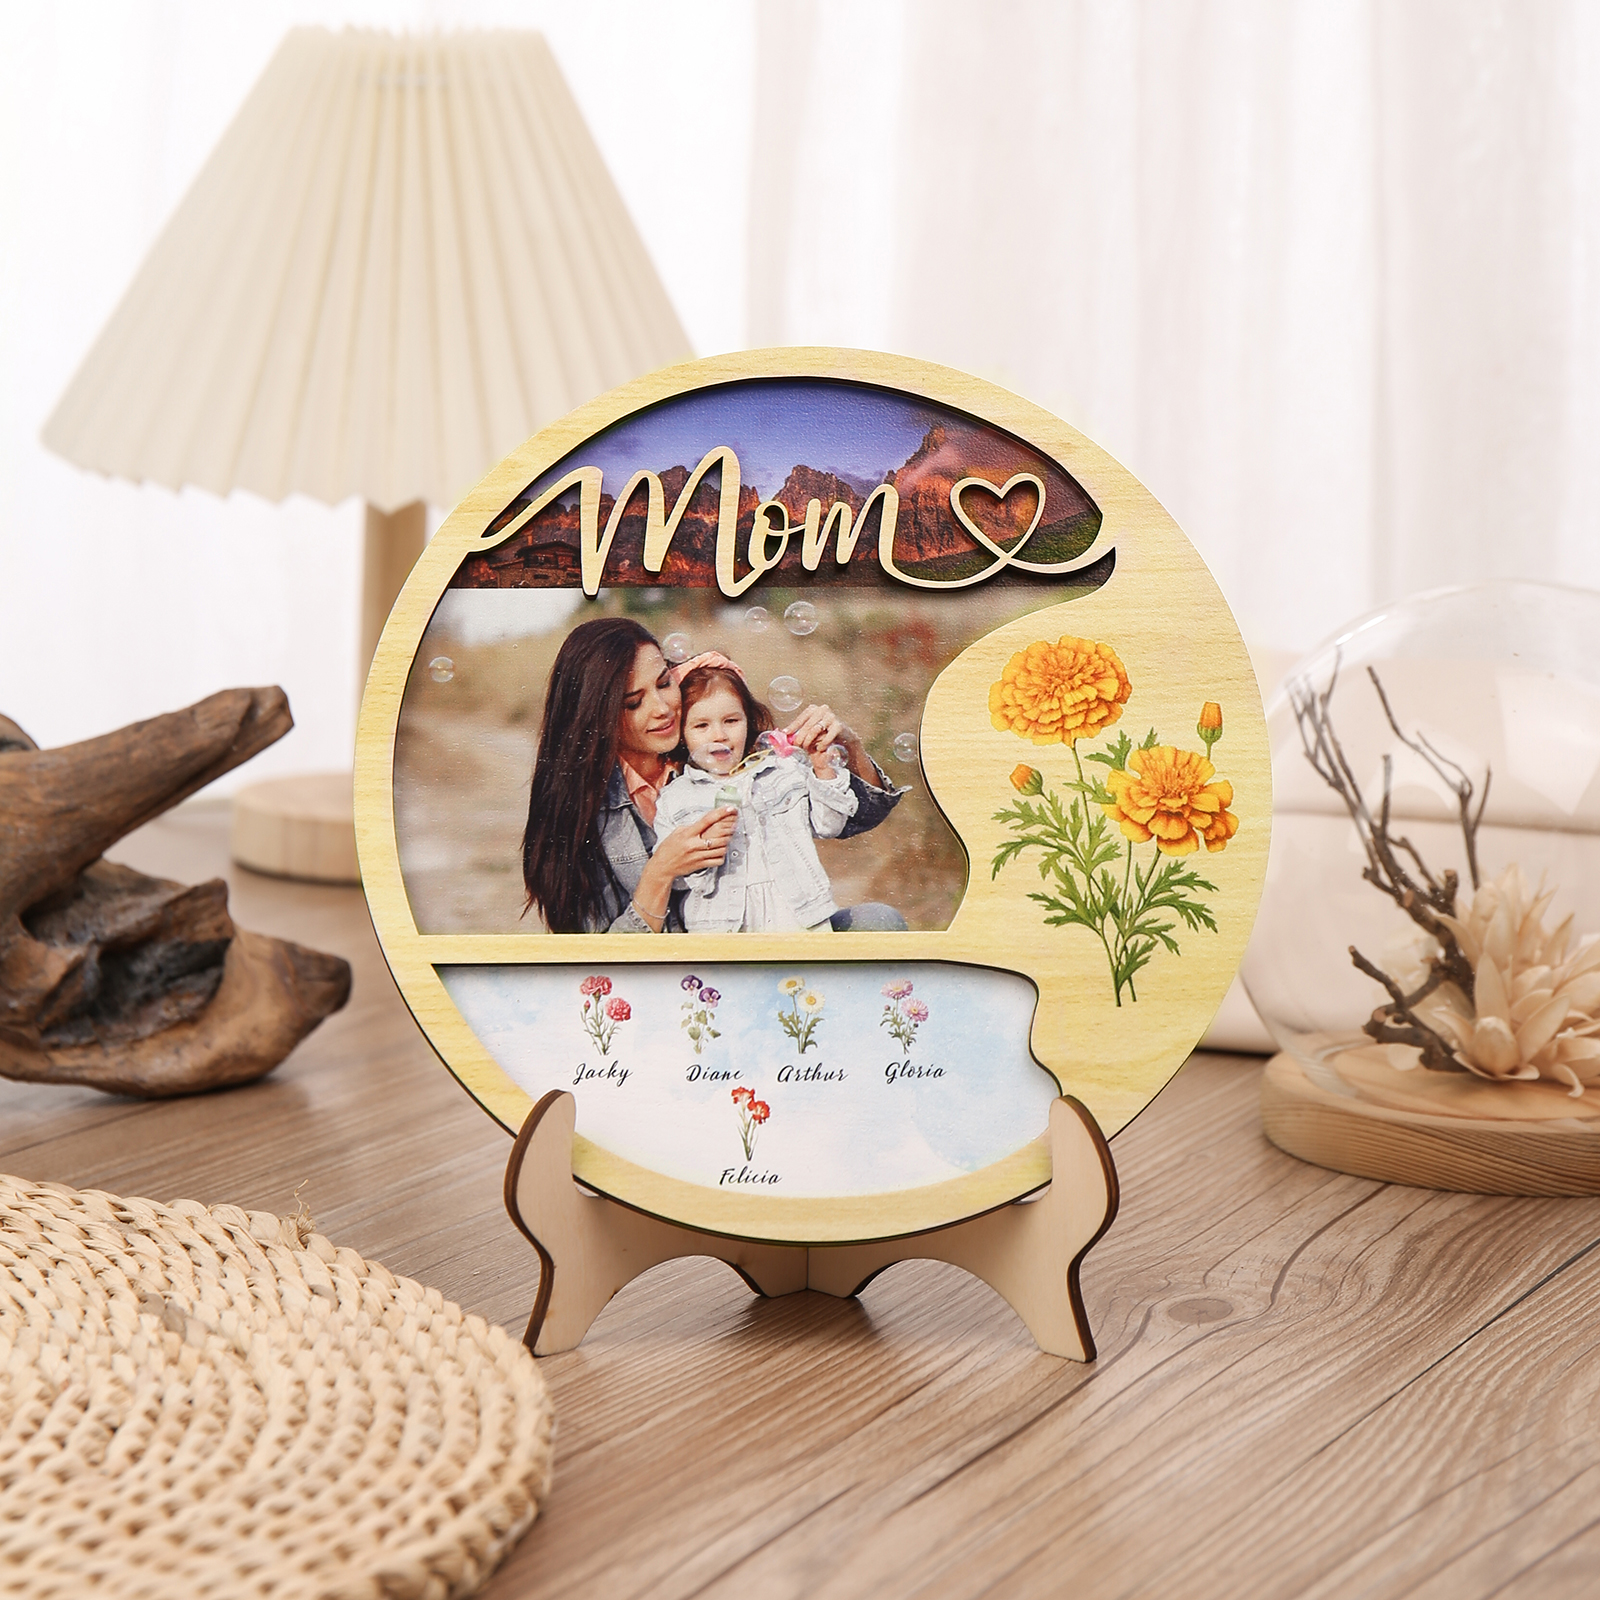 5 Names - Customized Photo Birth Flower Wooden Ornament Decoration for